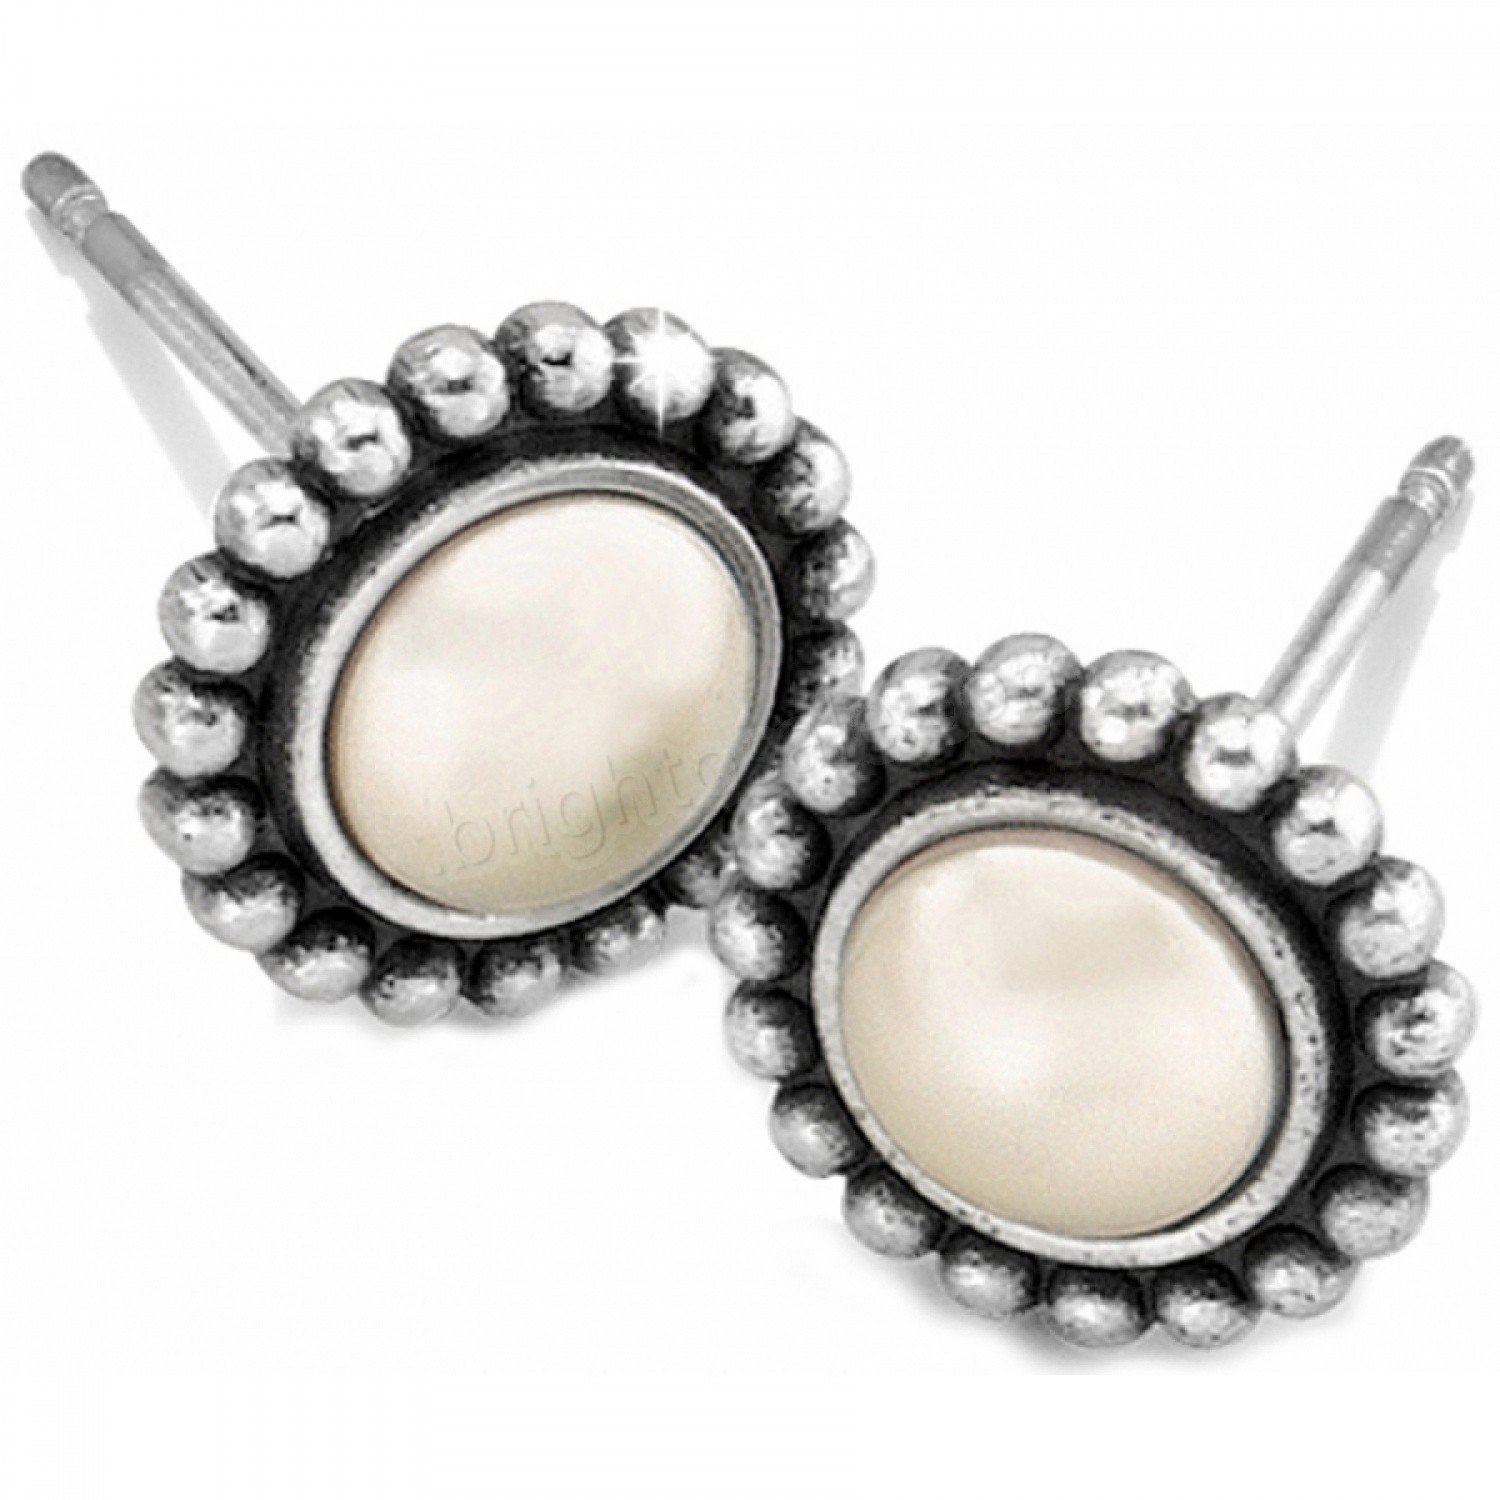 Brighton Collectibles & Online Discount Luster Mini Post Earrings - Brighton Collectibles & Online Discount Luster Mini Post Earrings